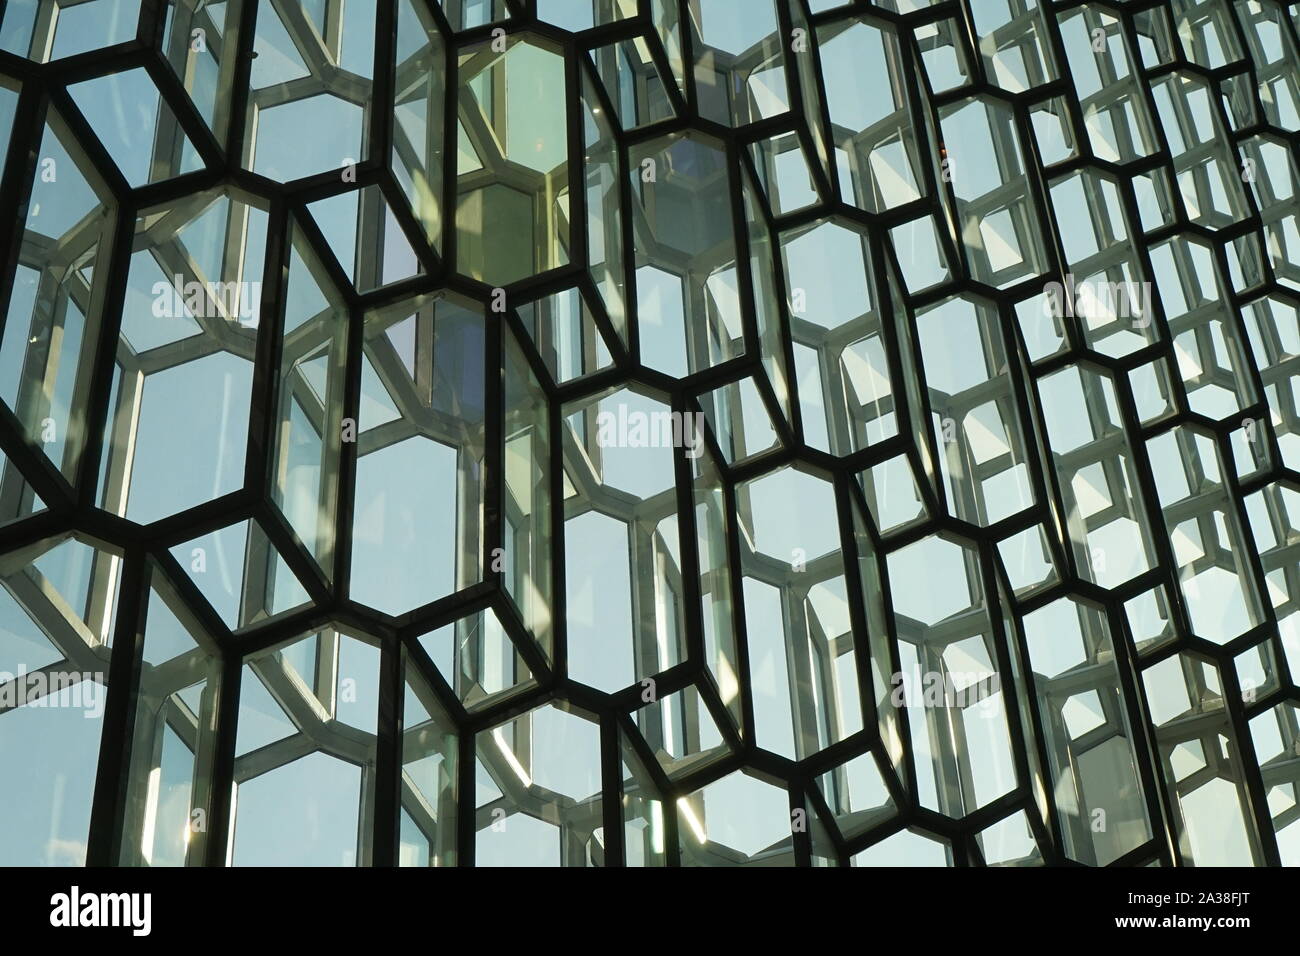 Patterns in modern glass architecture Stock Photo